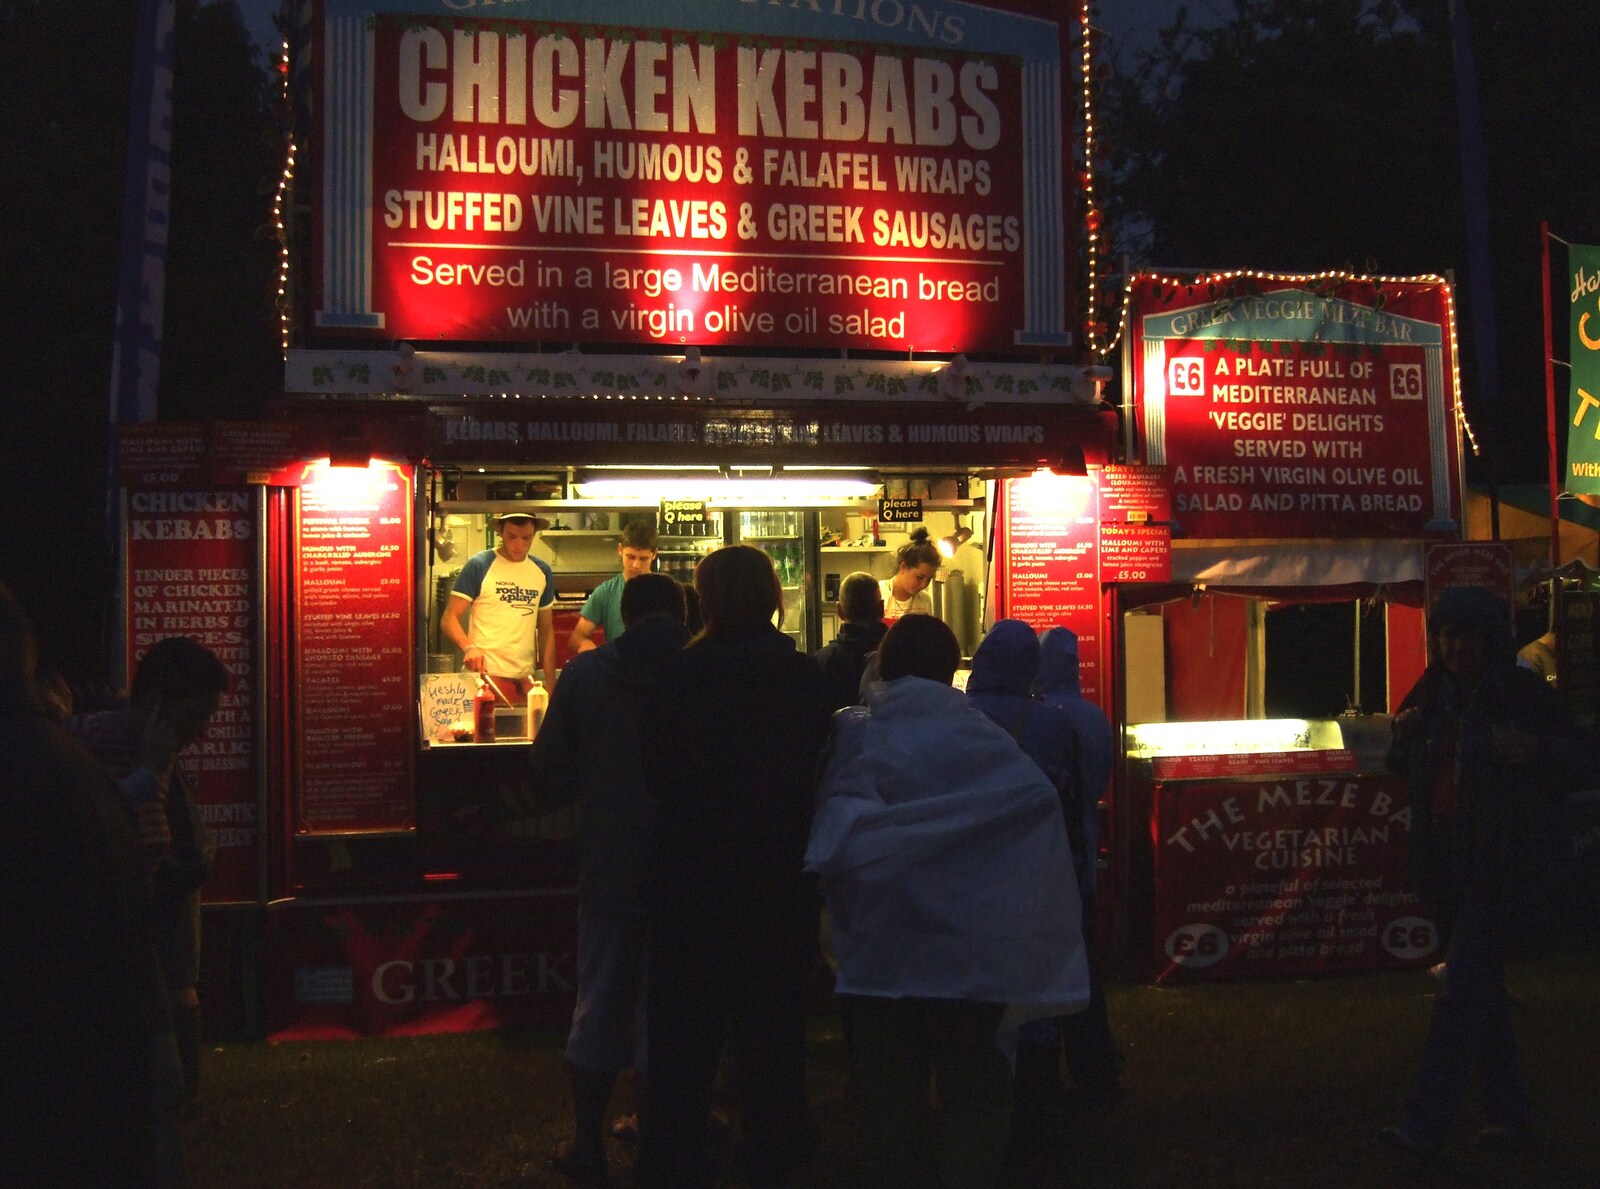 There's a queue at the kebab stand from The Cambridge Folk Festival, Cherry Hinton Hall, Cambridge - 1st August 2009